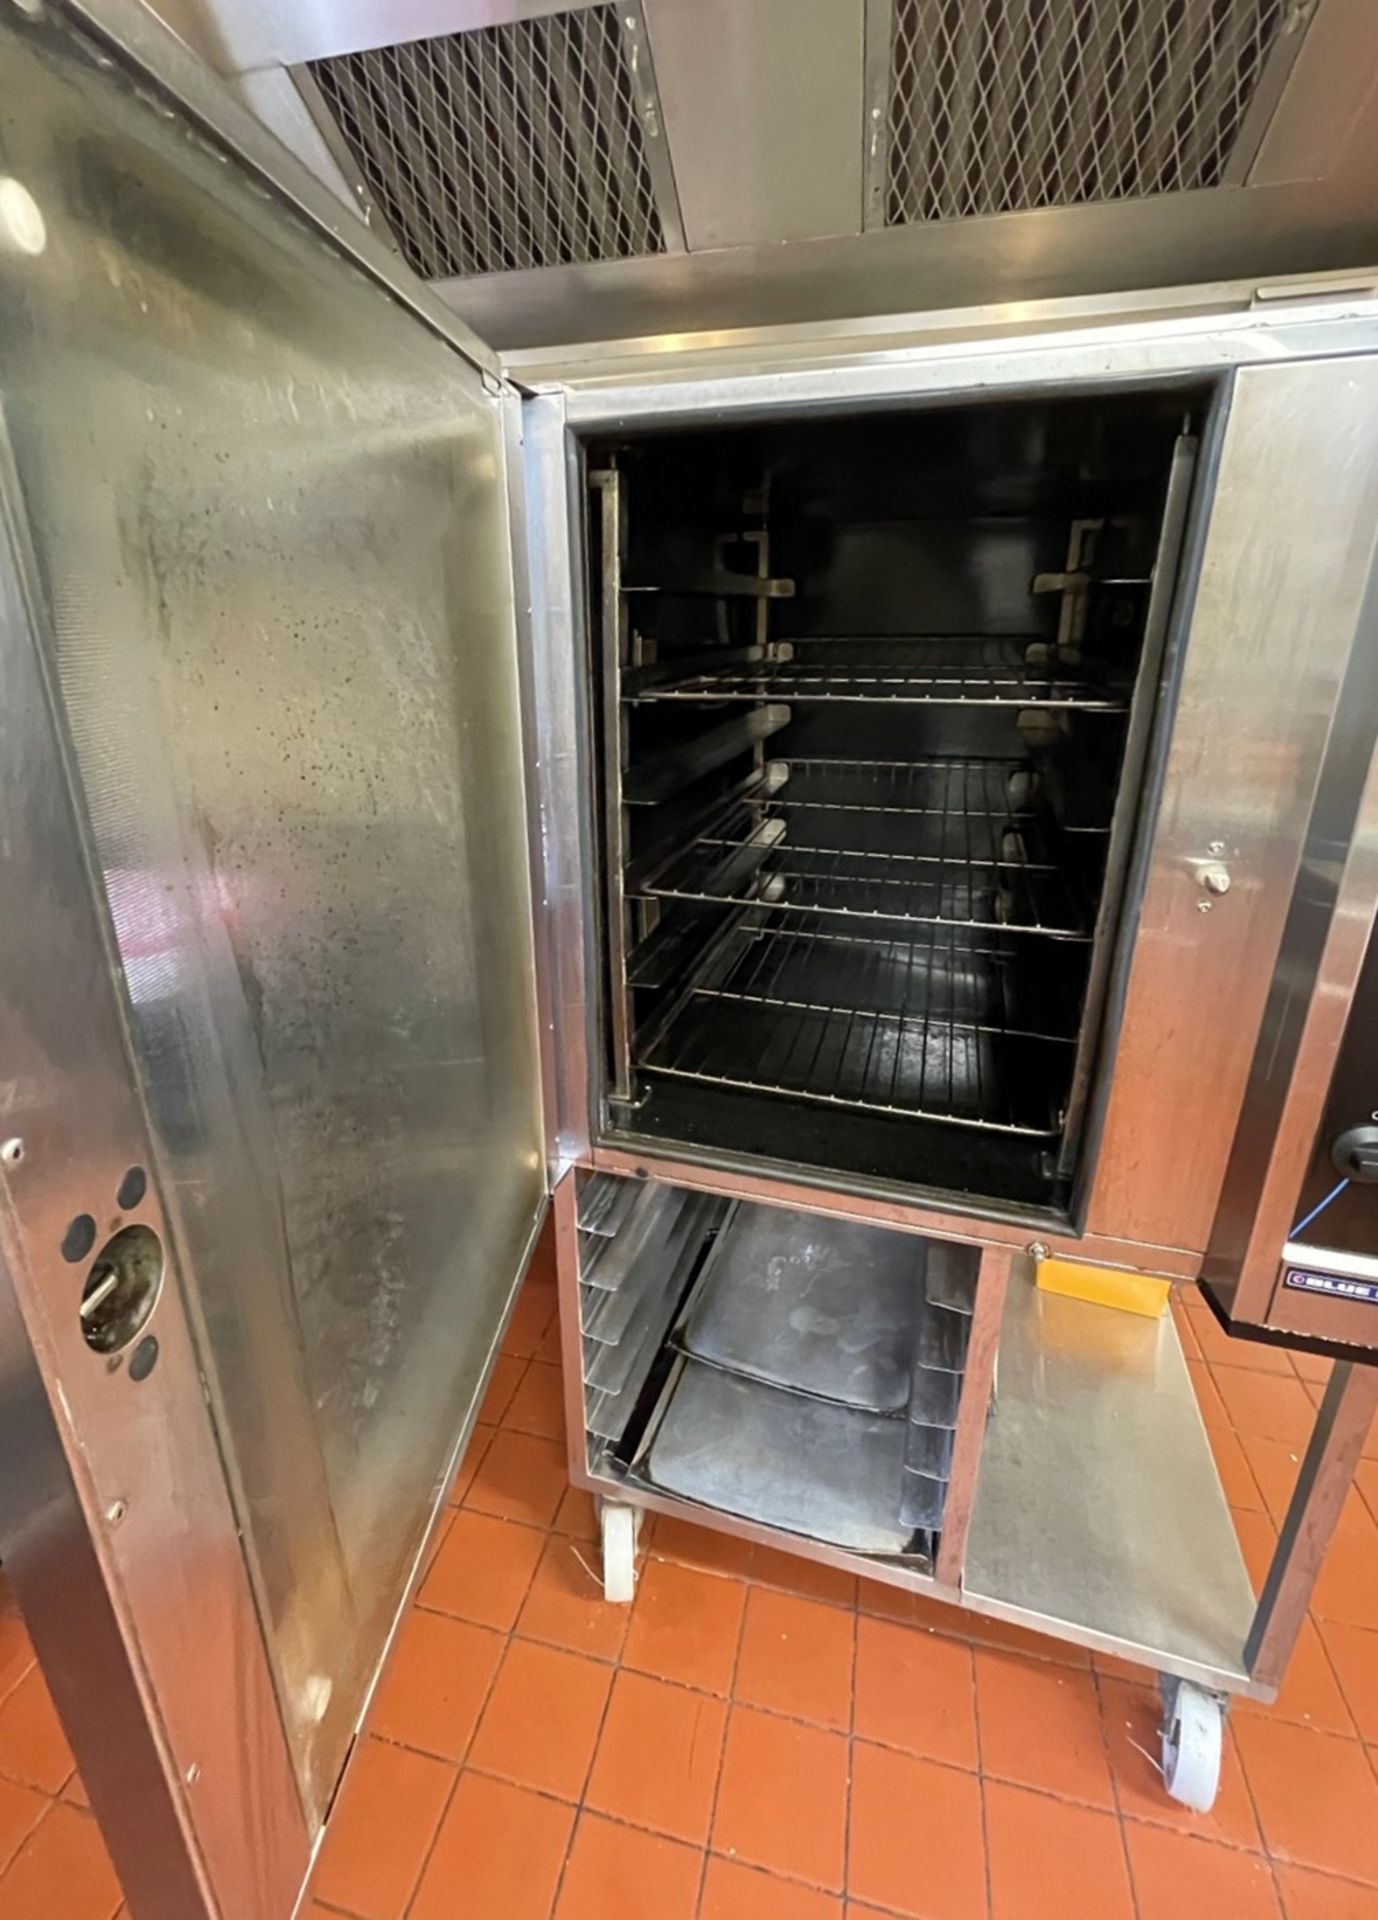 1 x Blue Seal Moffat Turbofan E35 Convection Oven With Stand - Model E35-30-453 - 400v Power - - Image 3 of 8